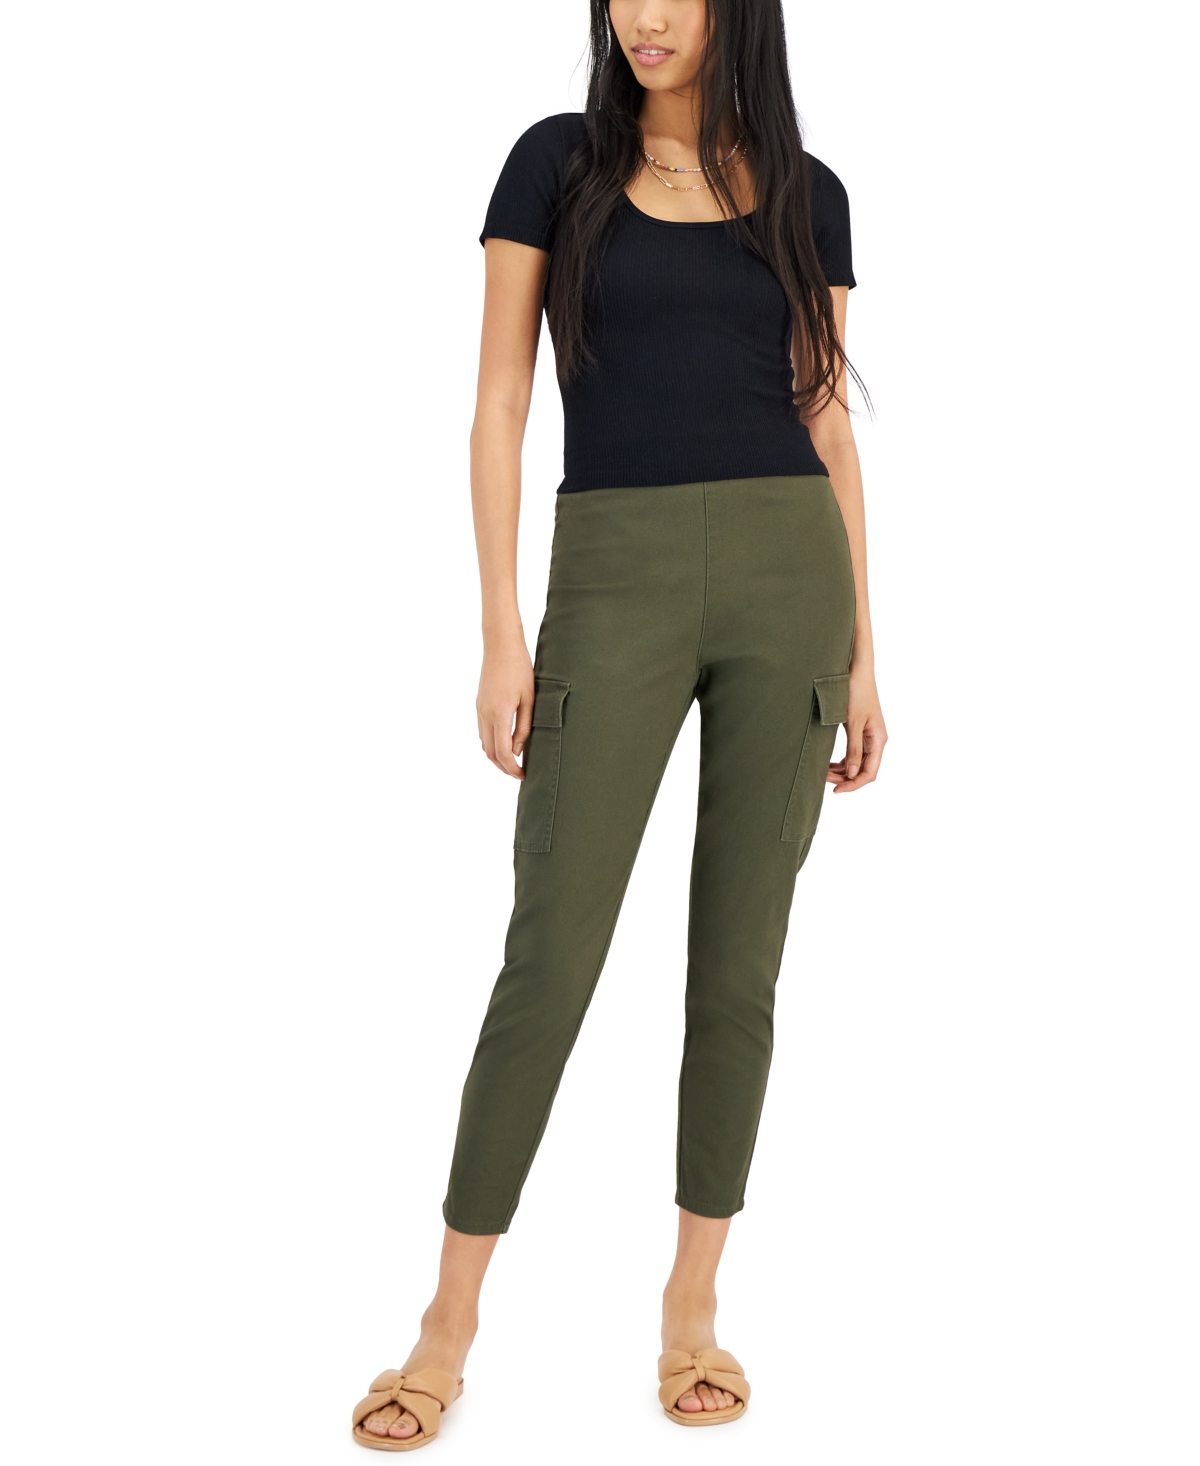 TINSELTOWN JUNIORS' PULL-ON SKINNY CARGO PANTS, CREATED FOR MACY'S